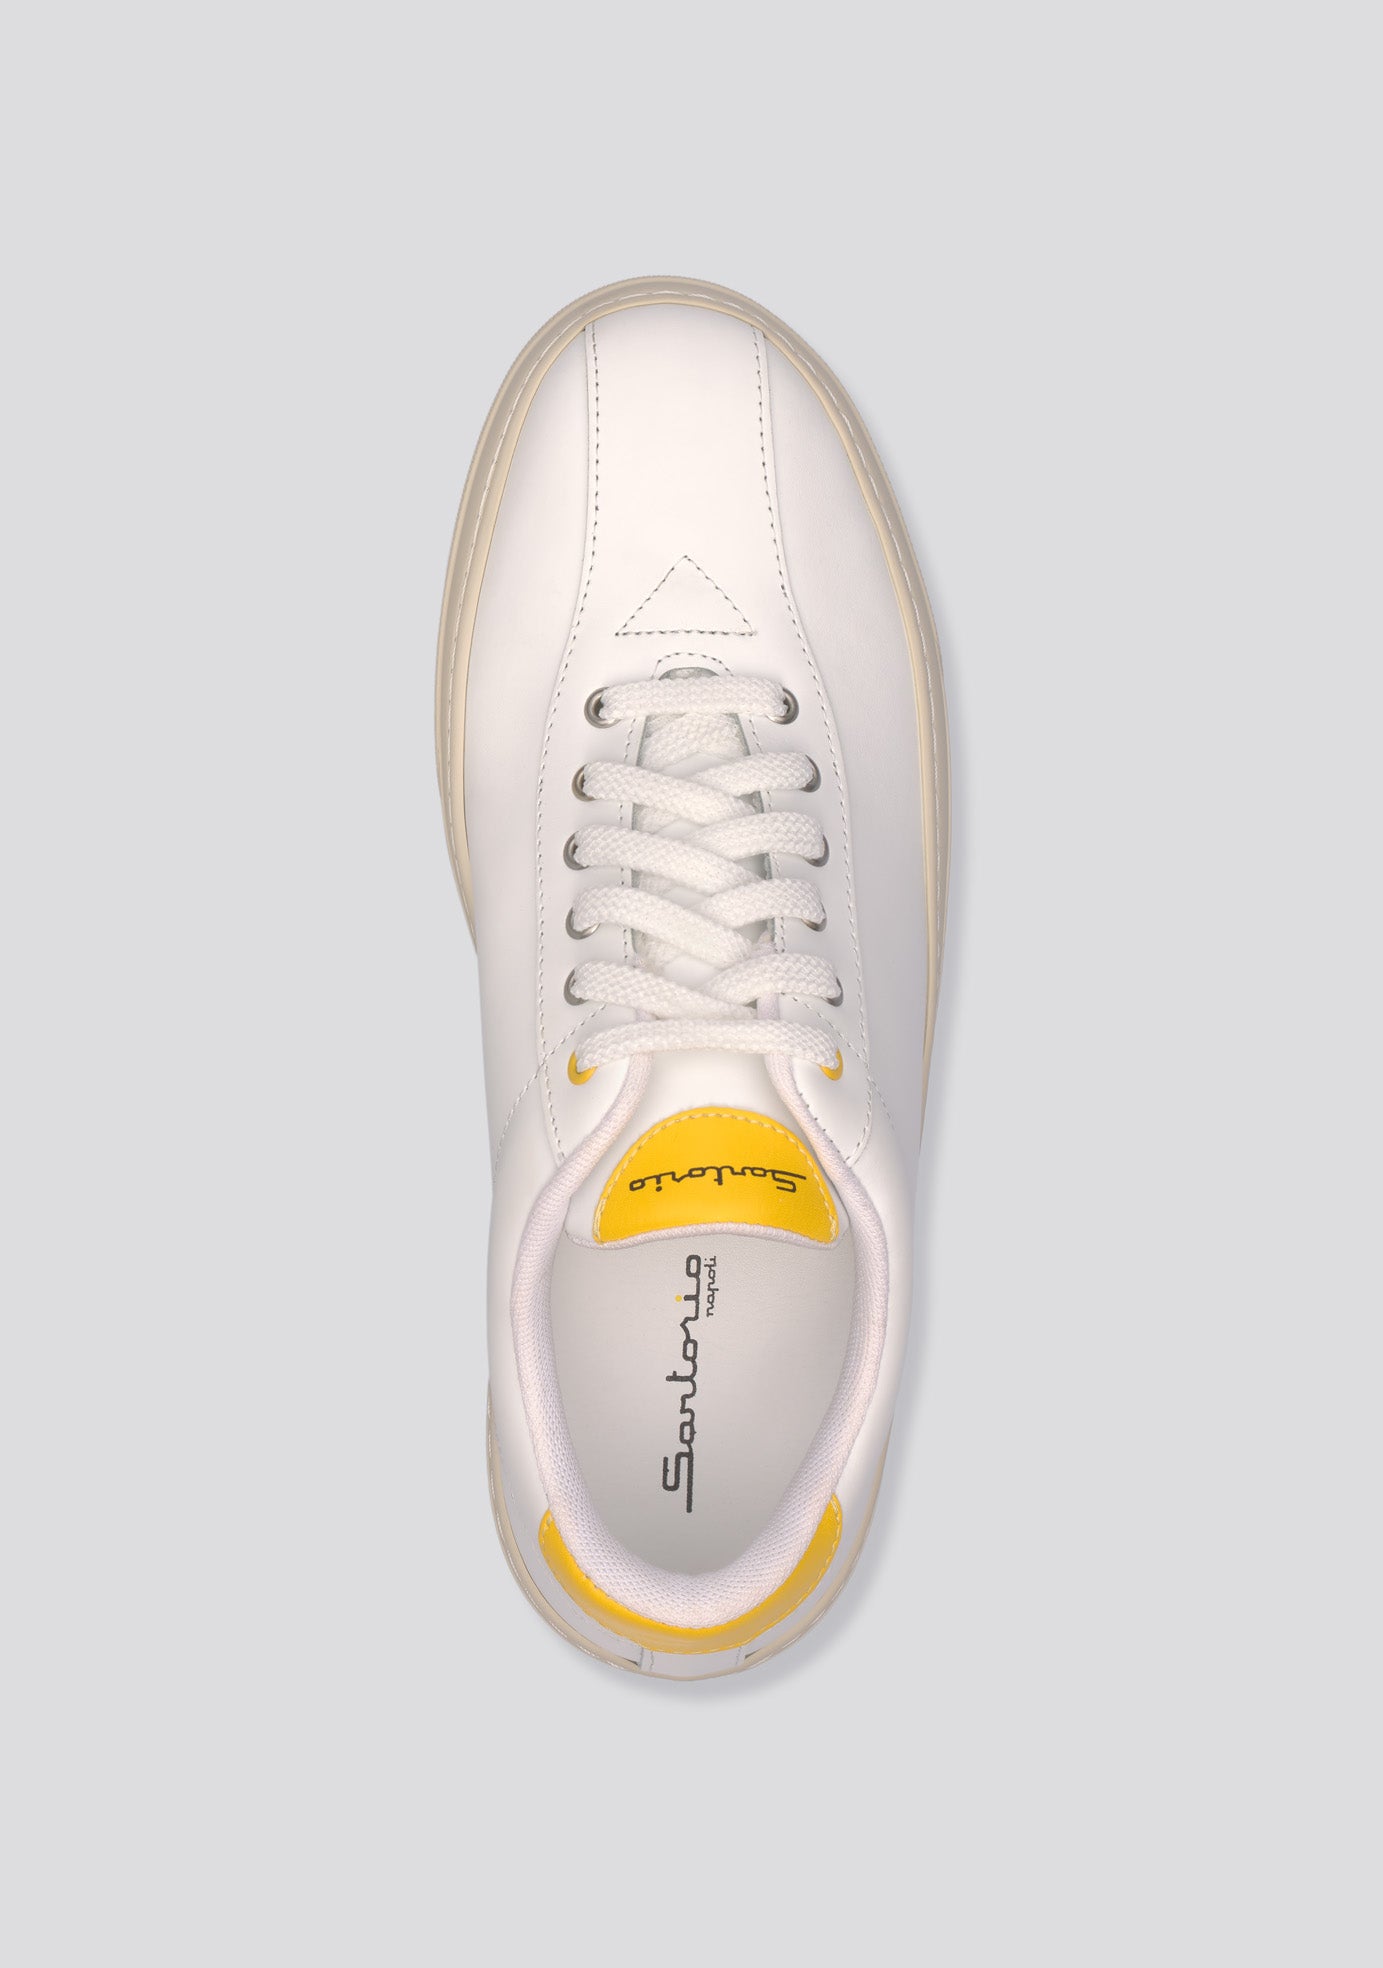 White Calfskin leather sneakers “Never Give Up”